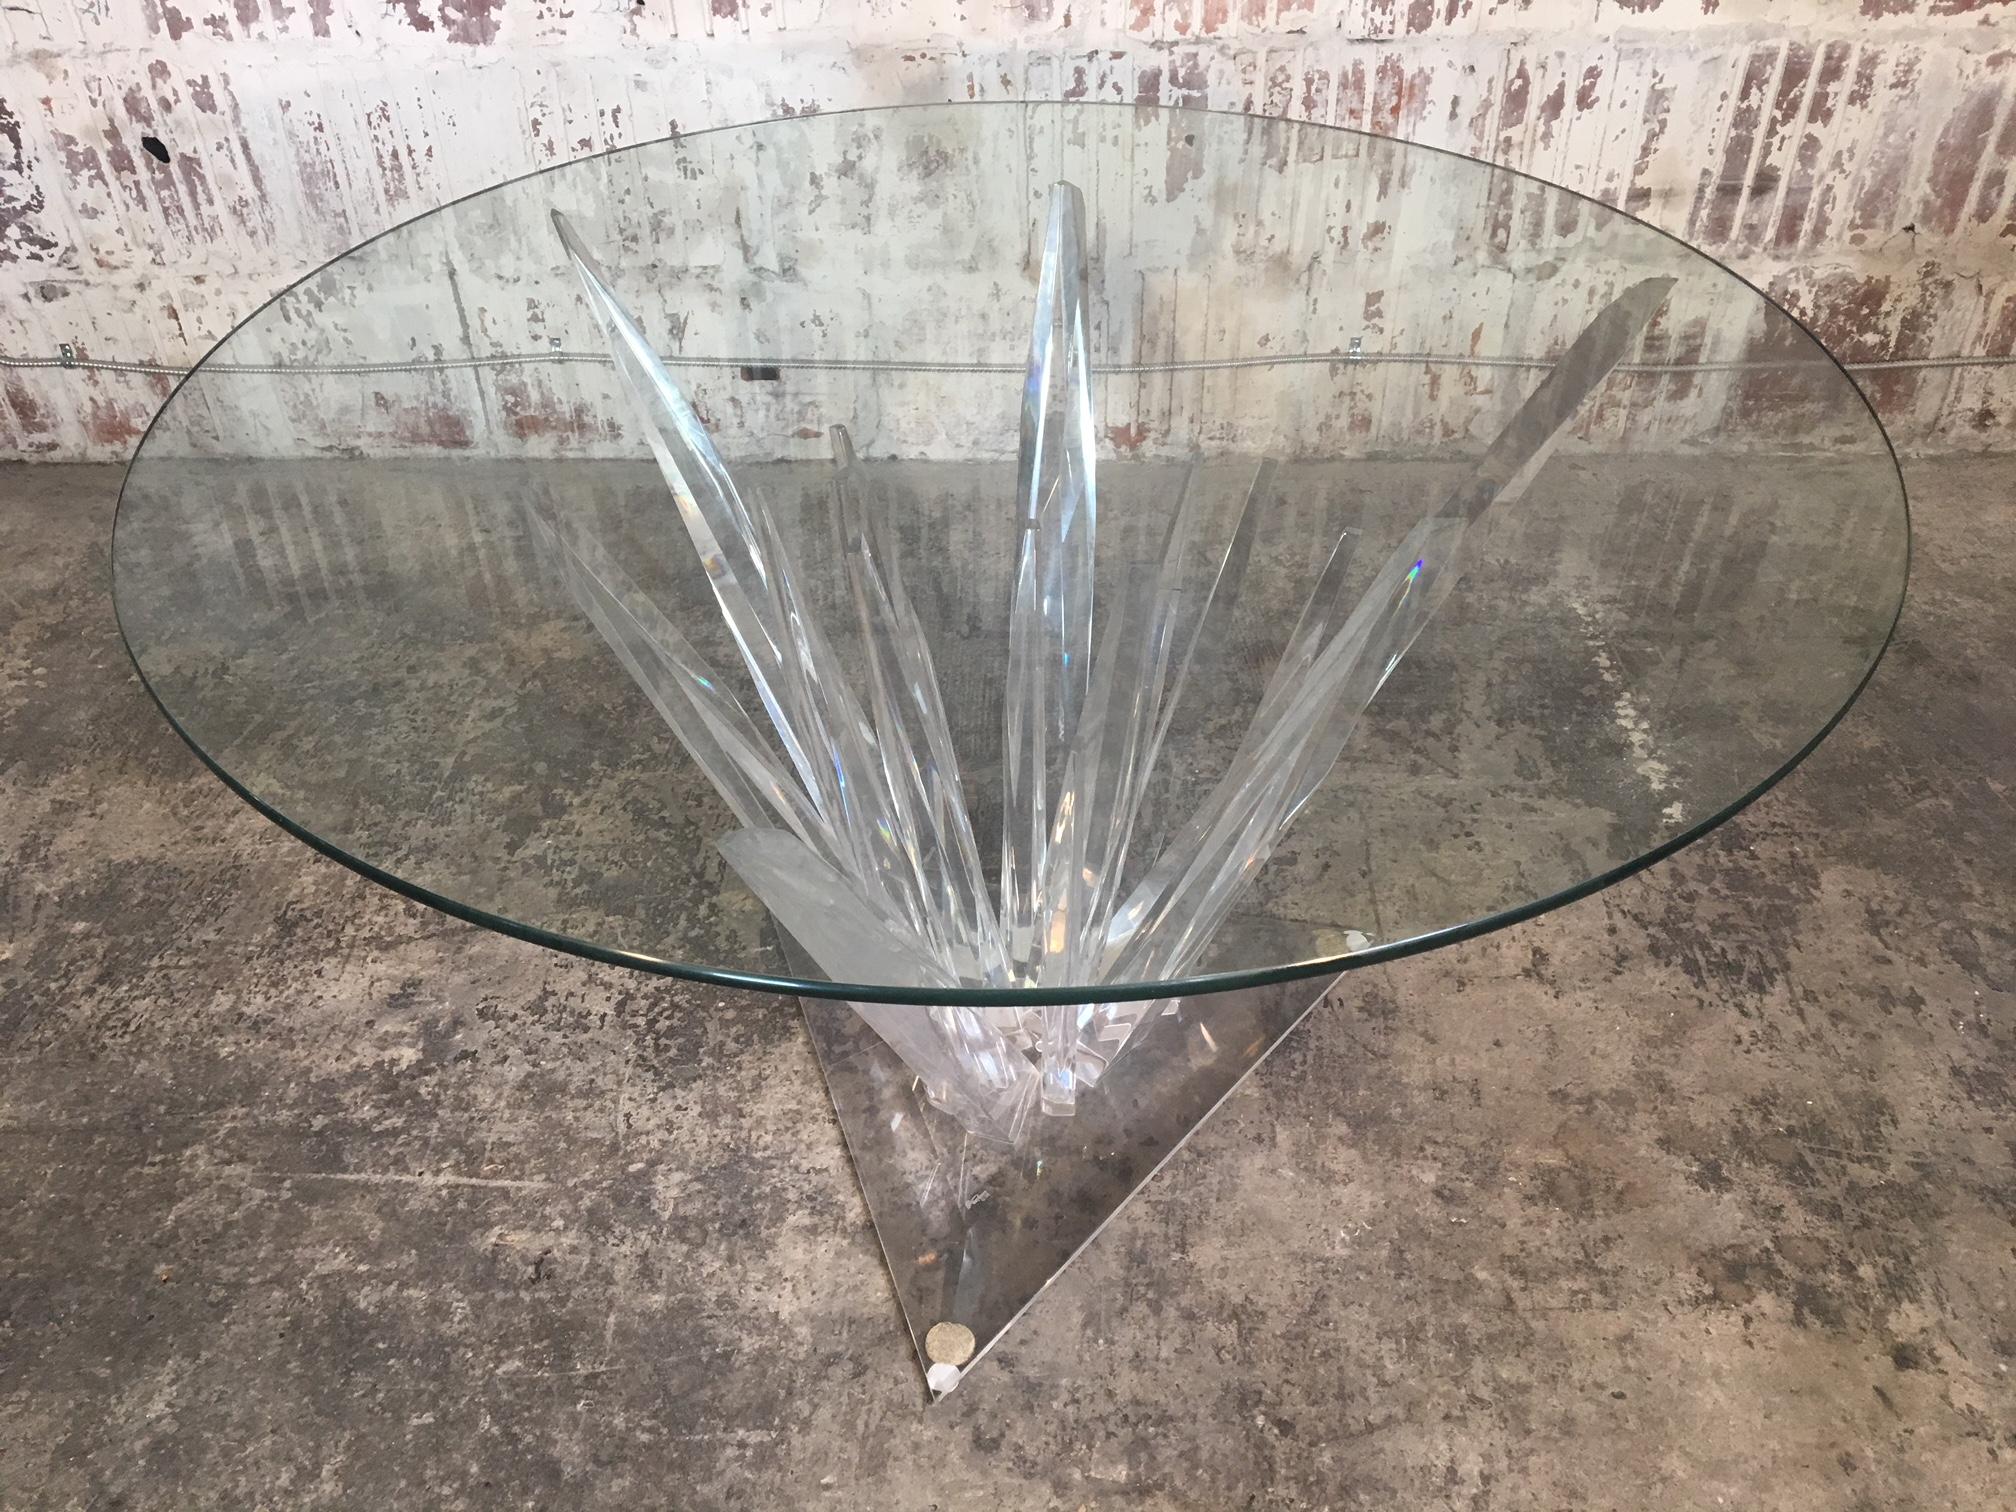 Sculptural Lucite dining table mimicking stalagmites with glass top, circa 1979. Lucite in excellent condition, free from scratches or discoloration. Glass top has surface scratches. Definite statement piece. Glass measures 48